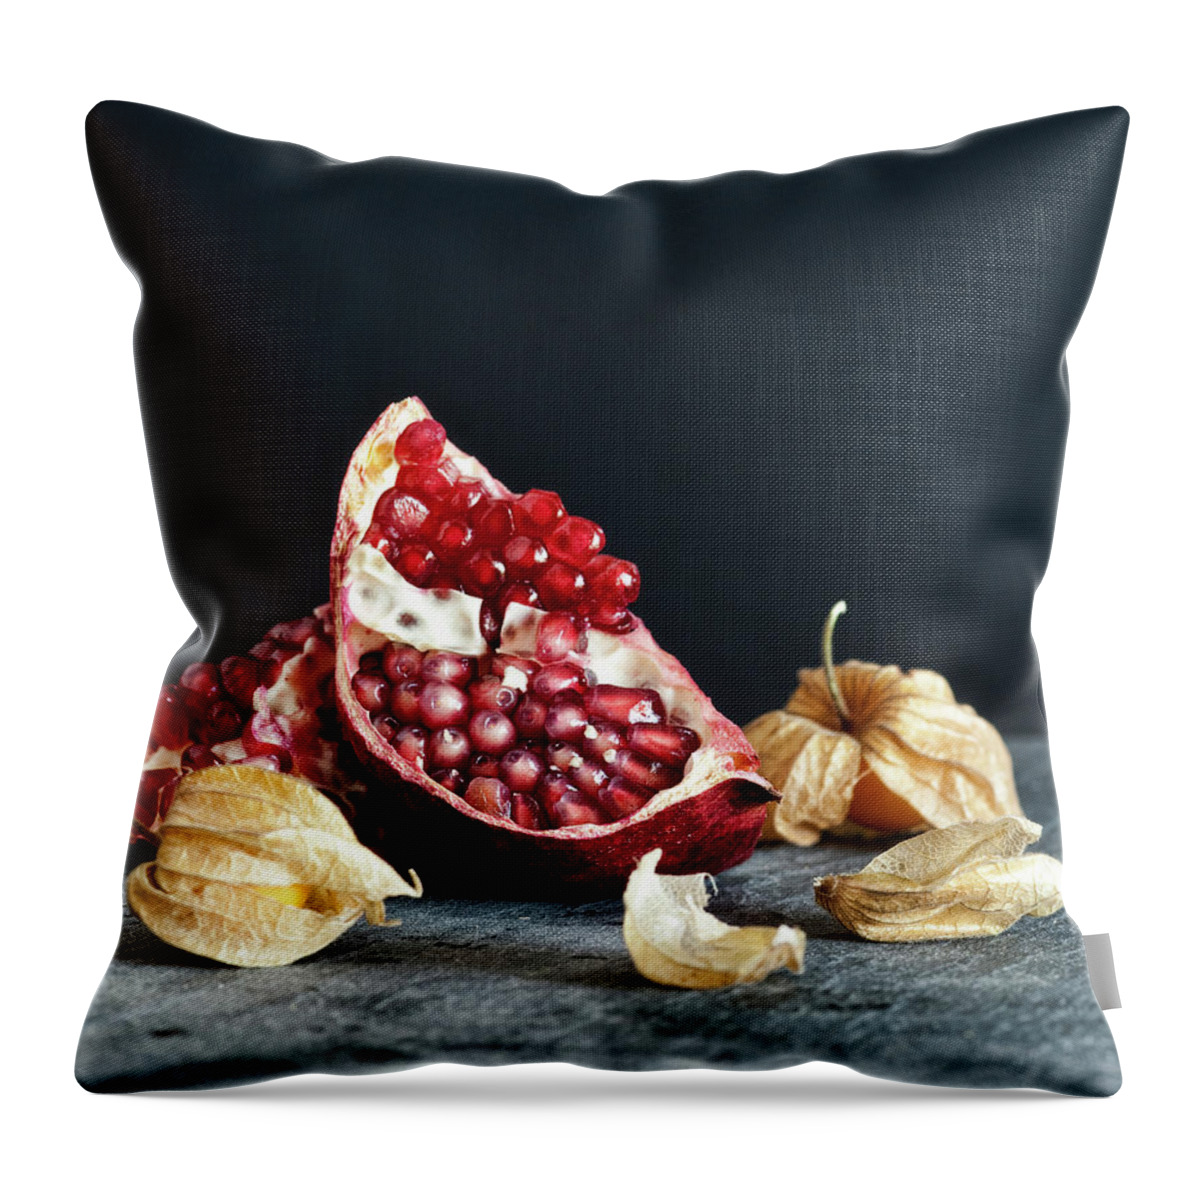 Black Background Throw Pillow featuring the photograph Food Still Life by Carlo A